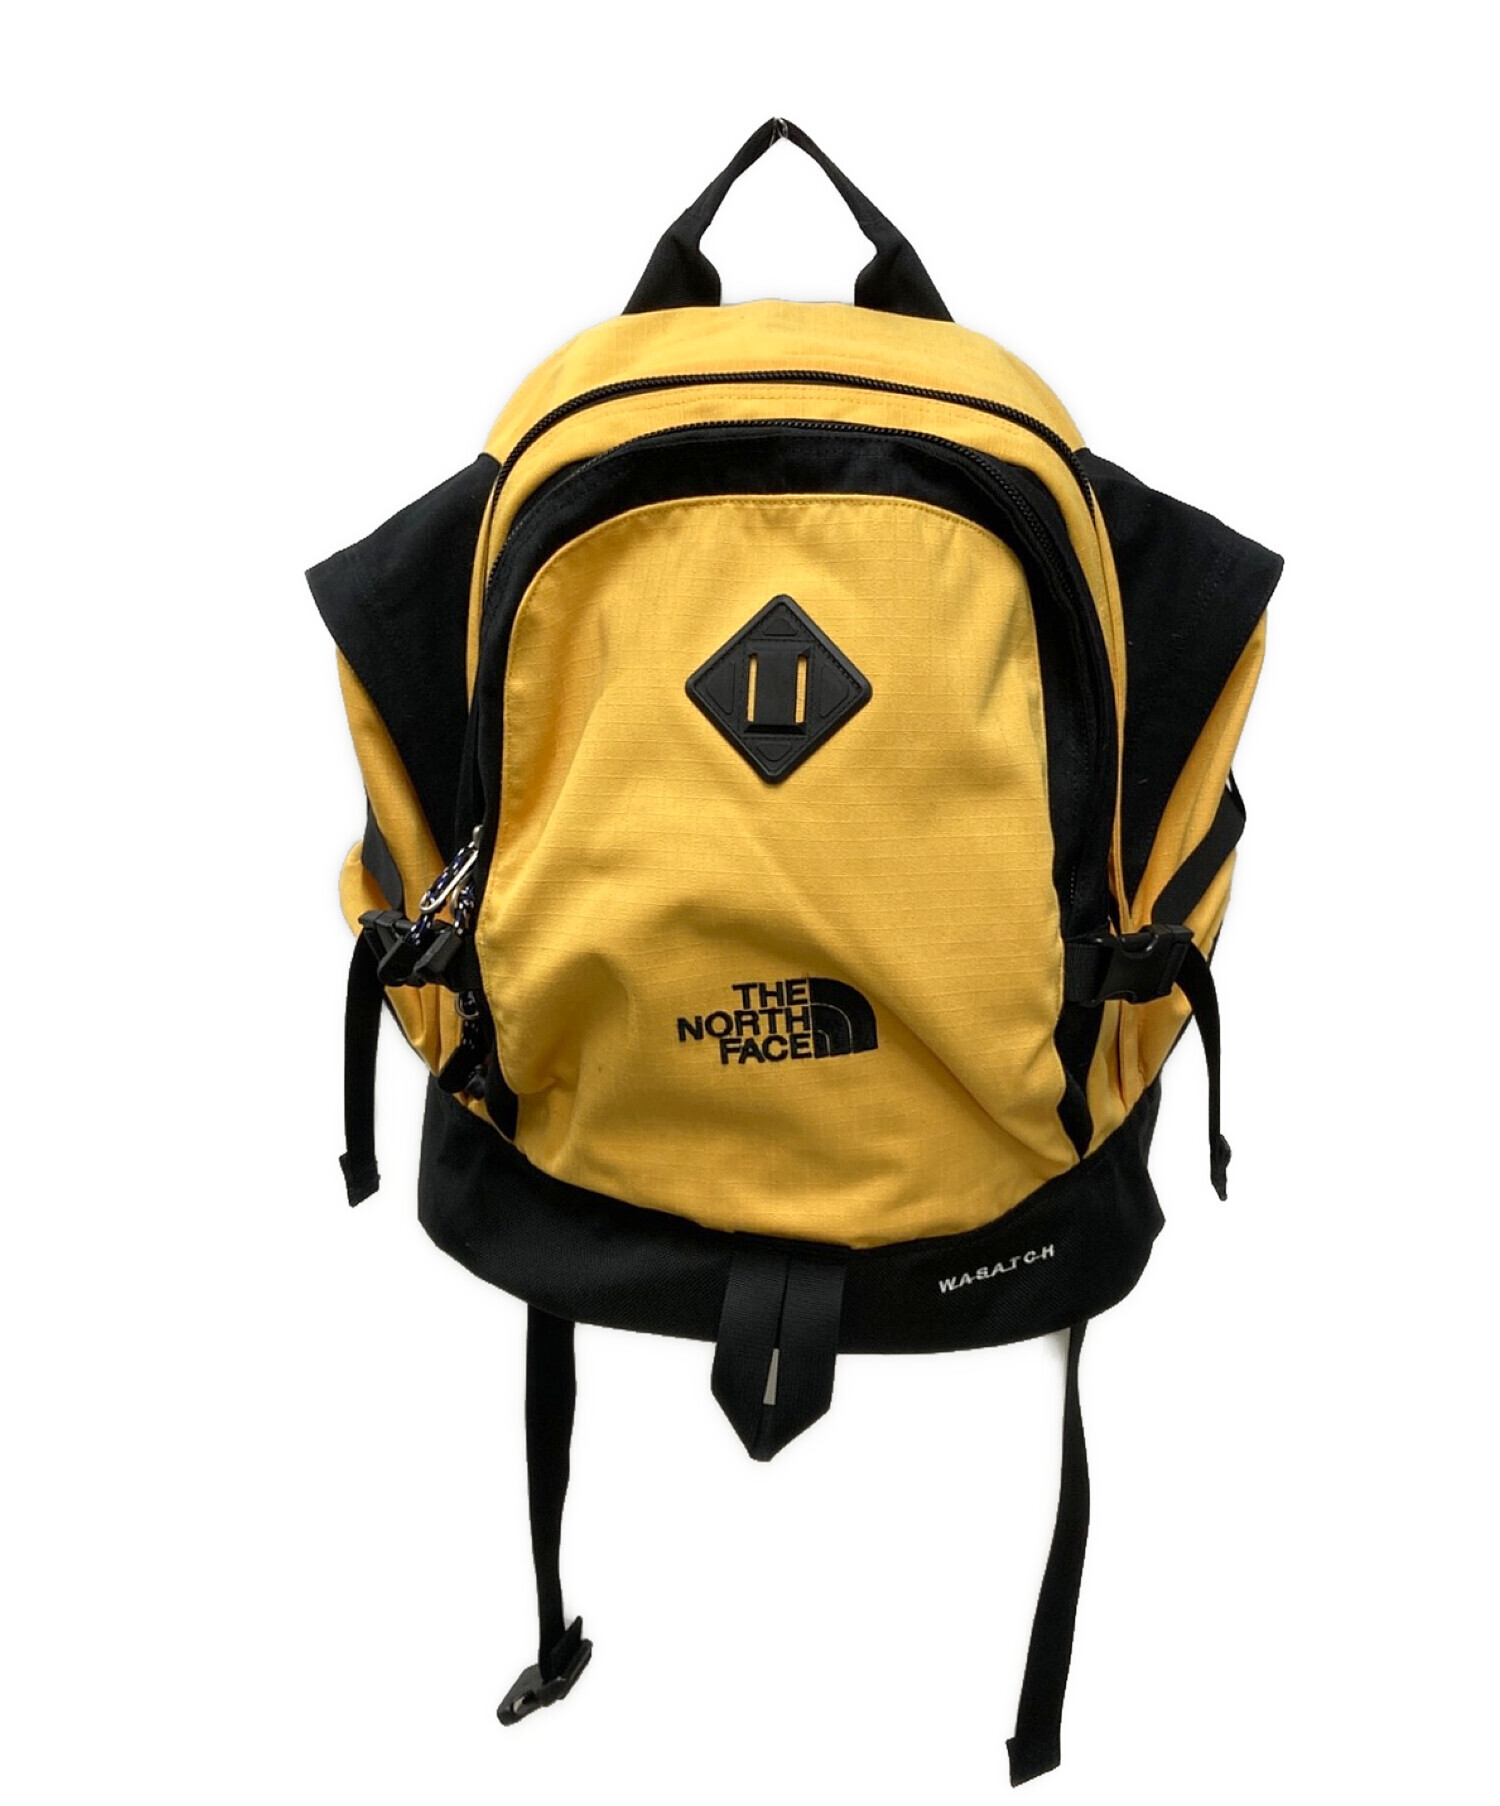 THE NORTH FACE (ザ ノース フェイス) WASATCH REISSUE BACKPACK イエロー×ブラック